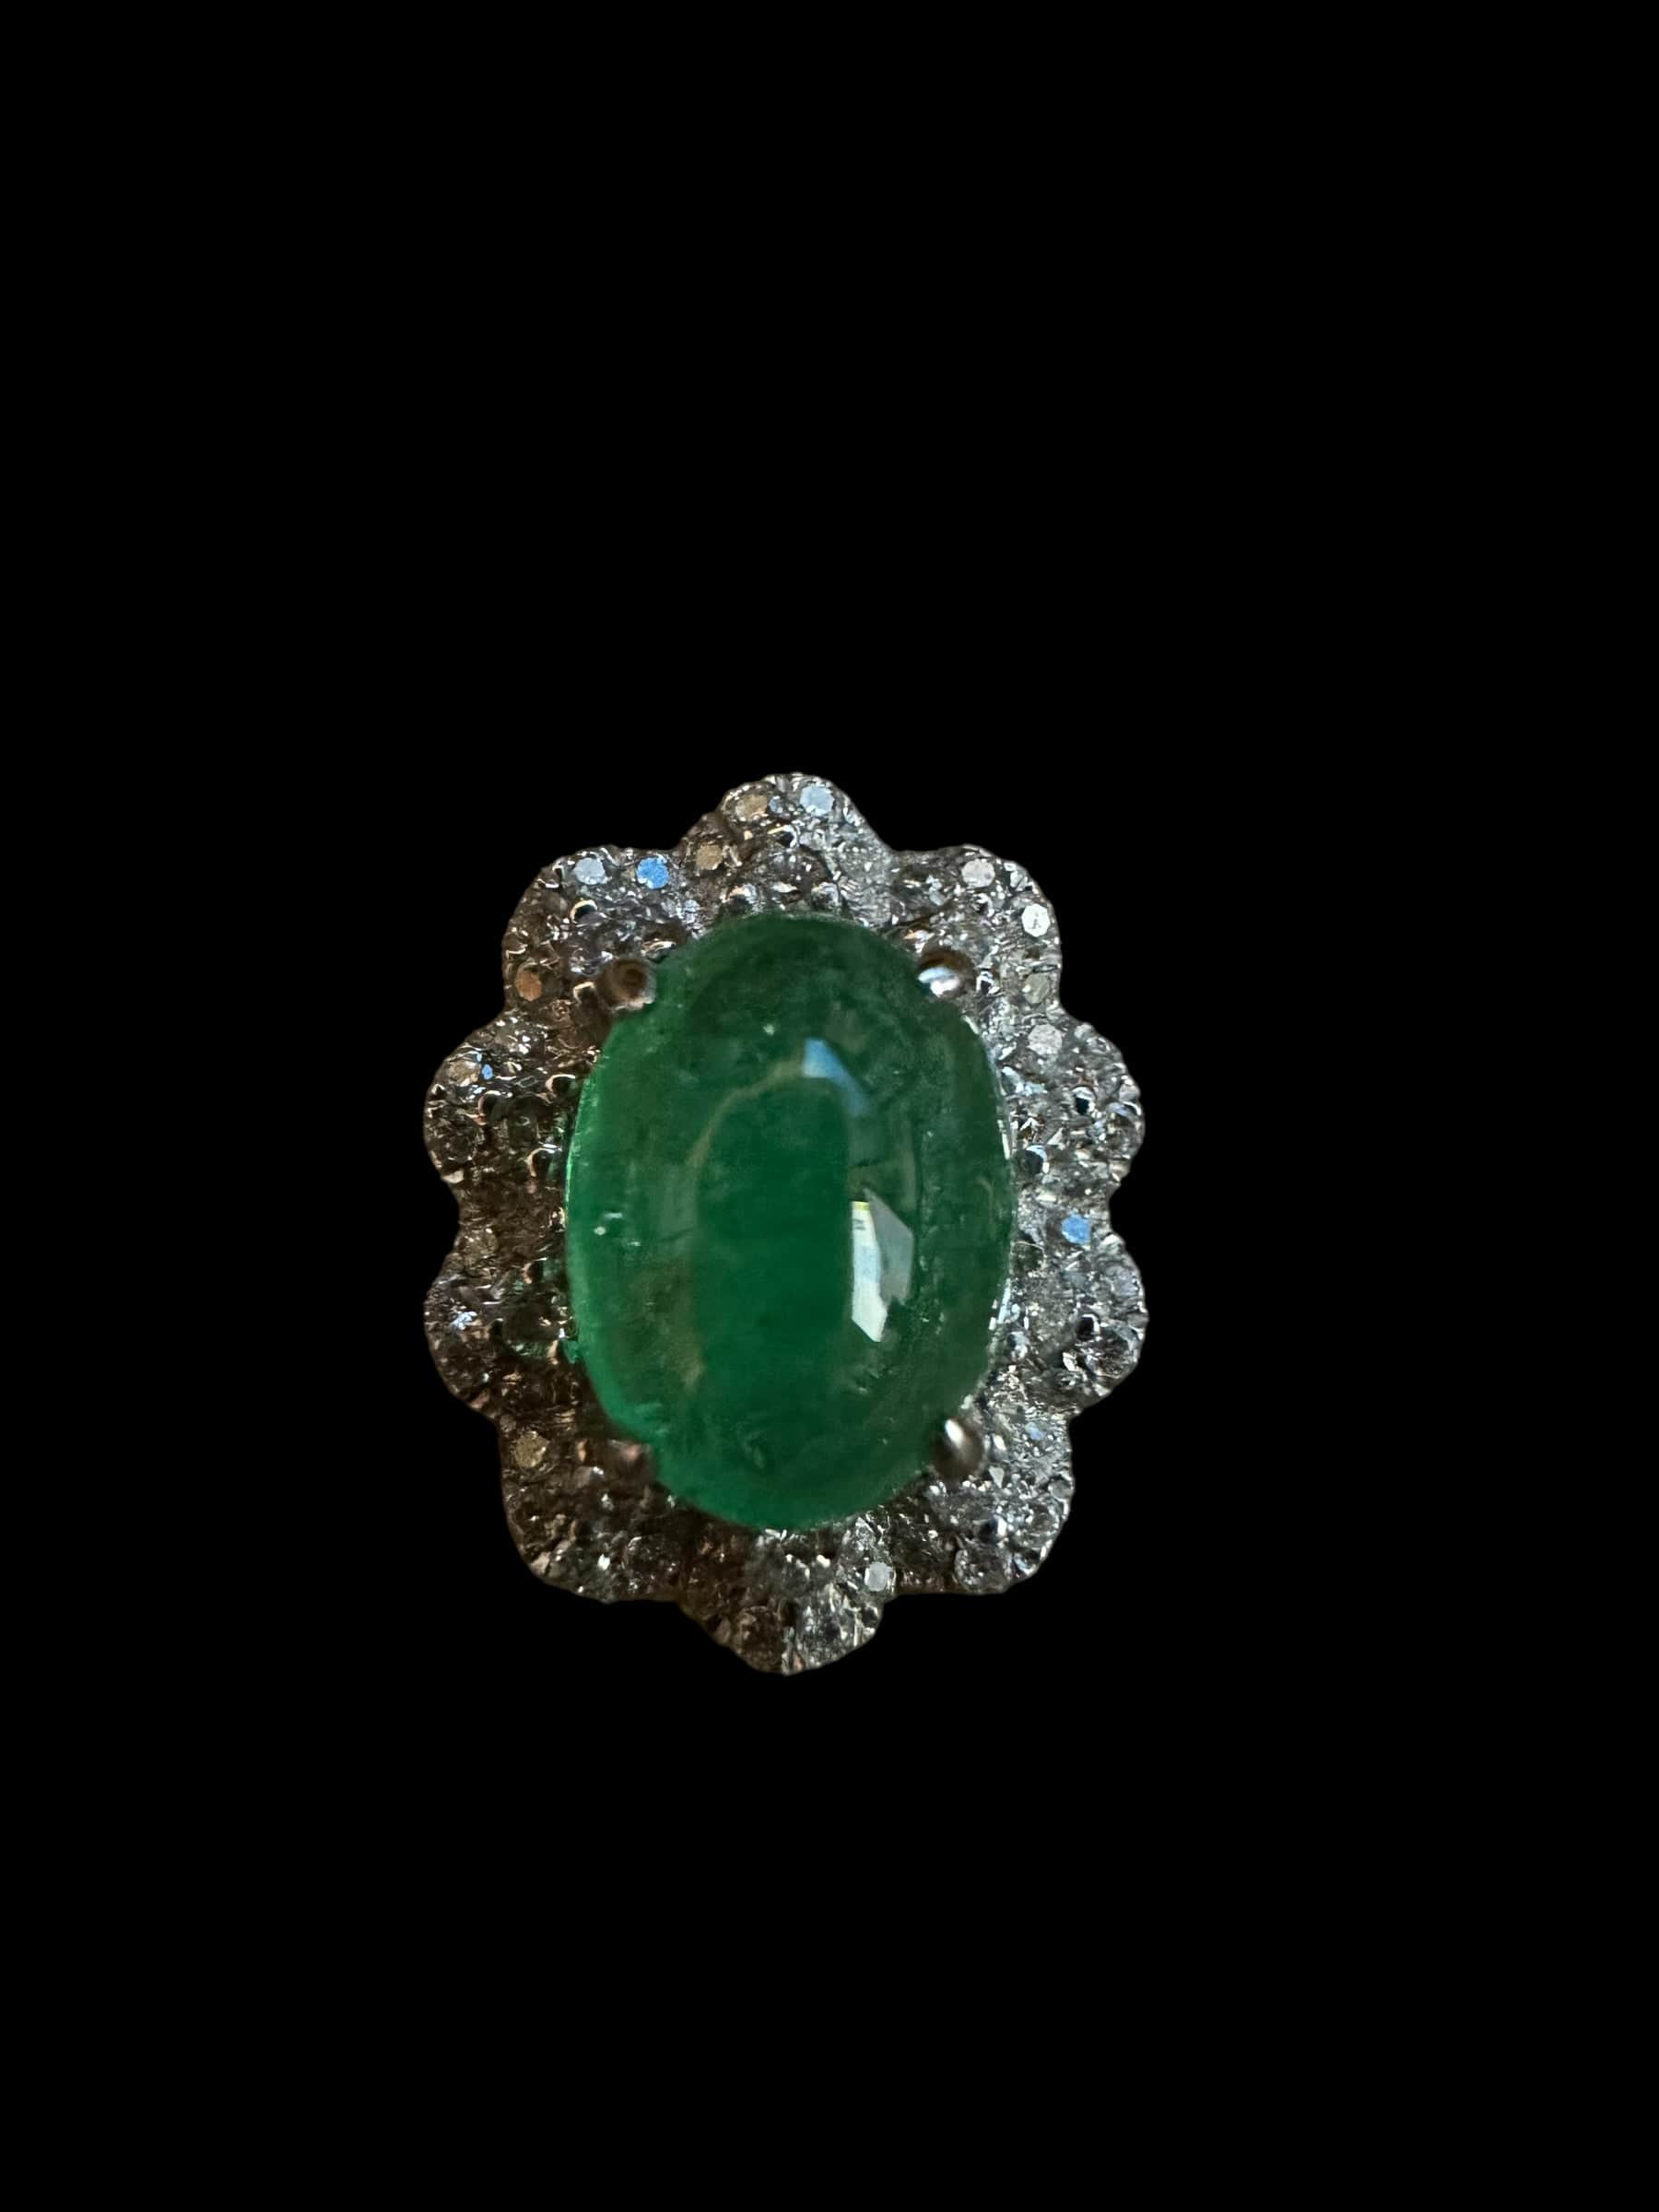 Luxury Promise Oval Cabochon Cut Emerald with Surrounding  Diamond Ring set in 18K White Gold